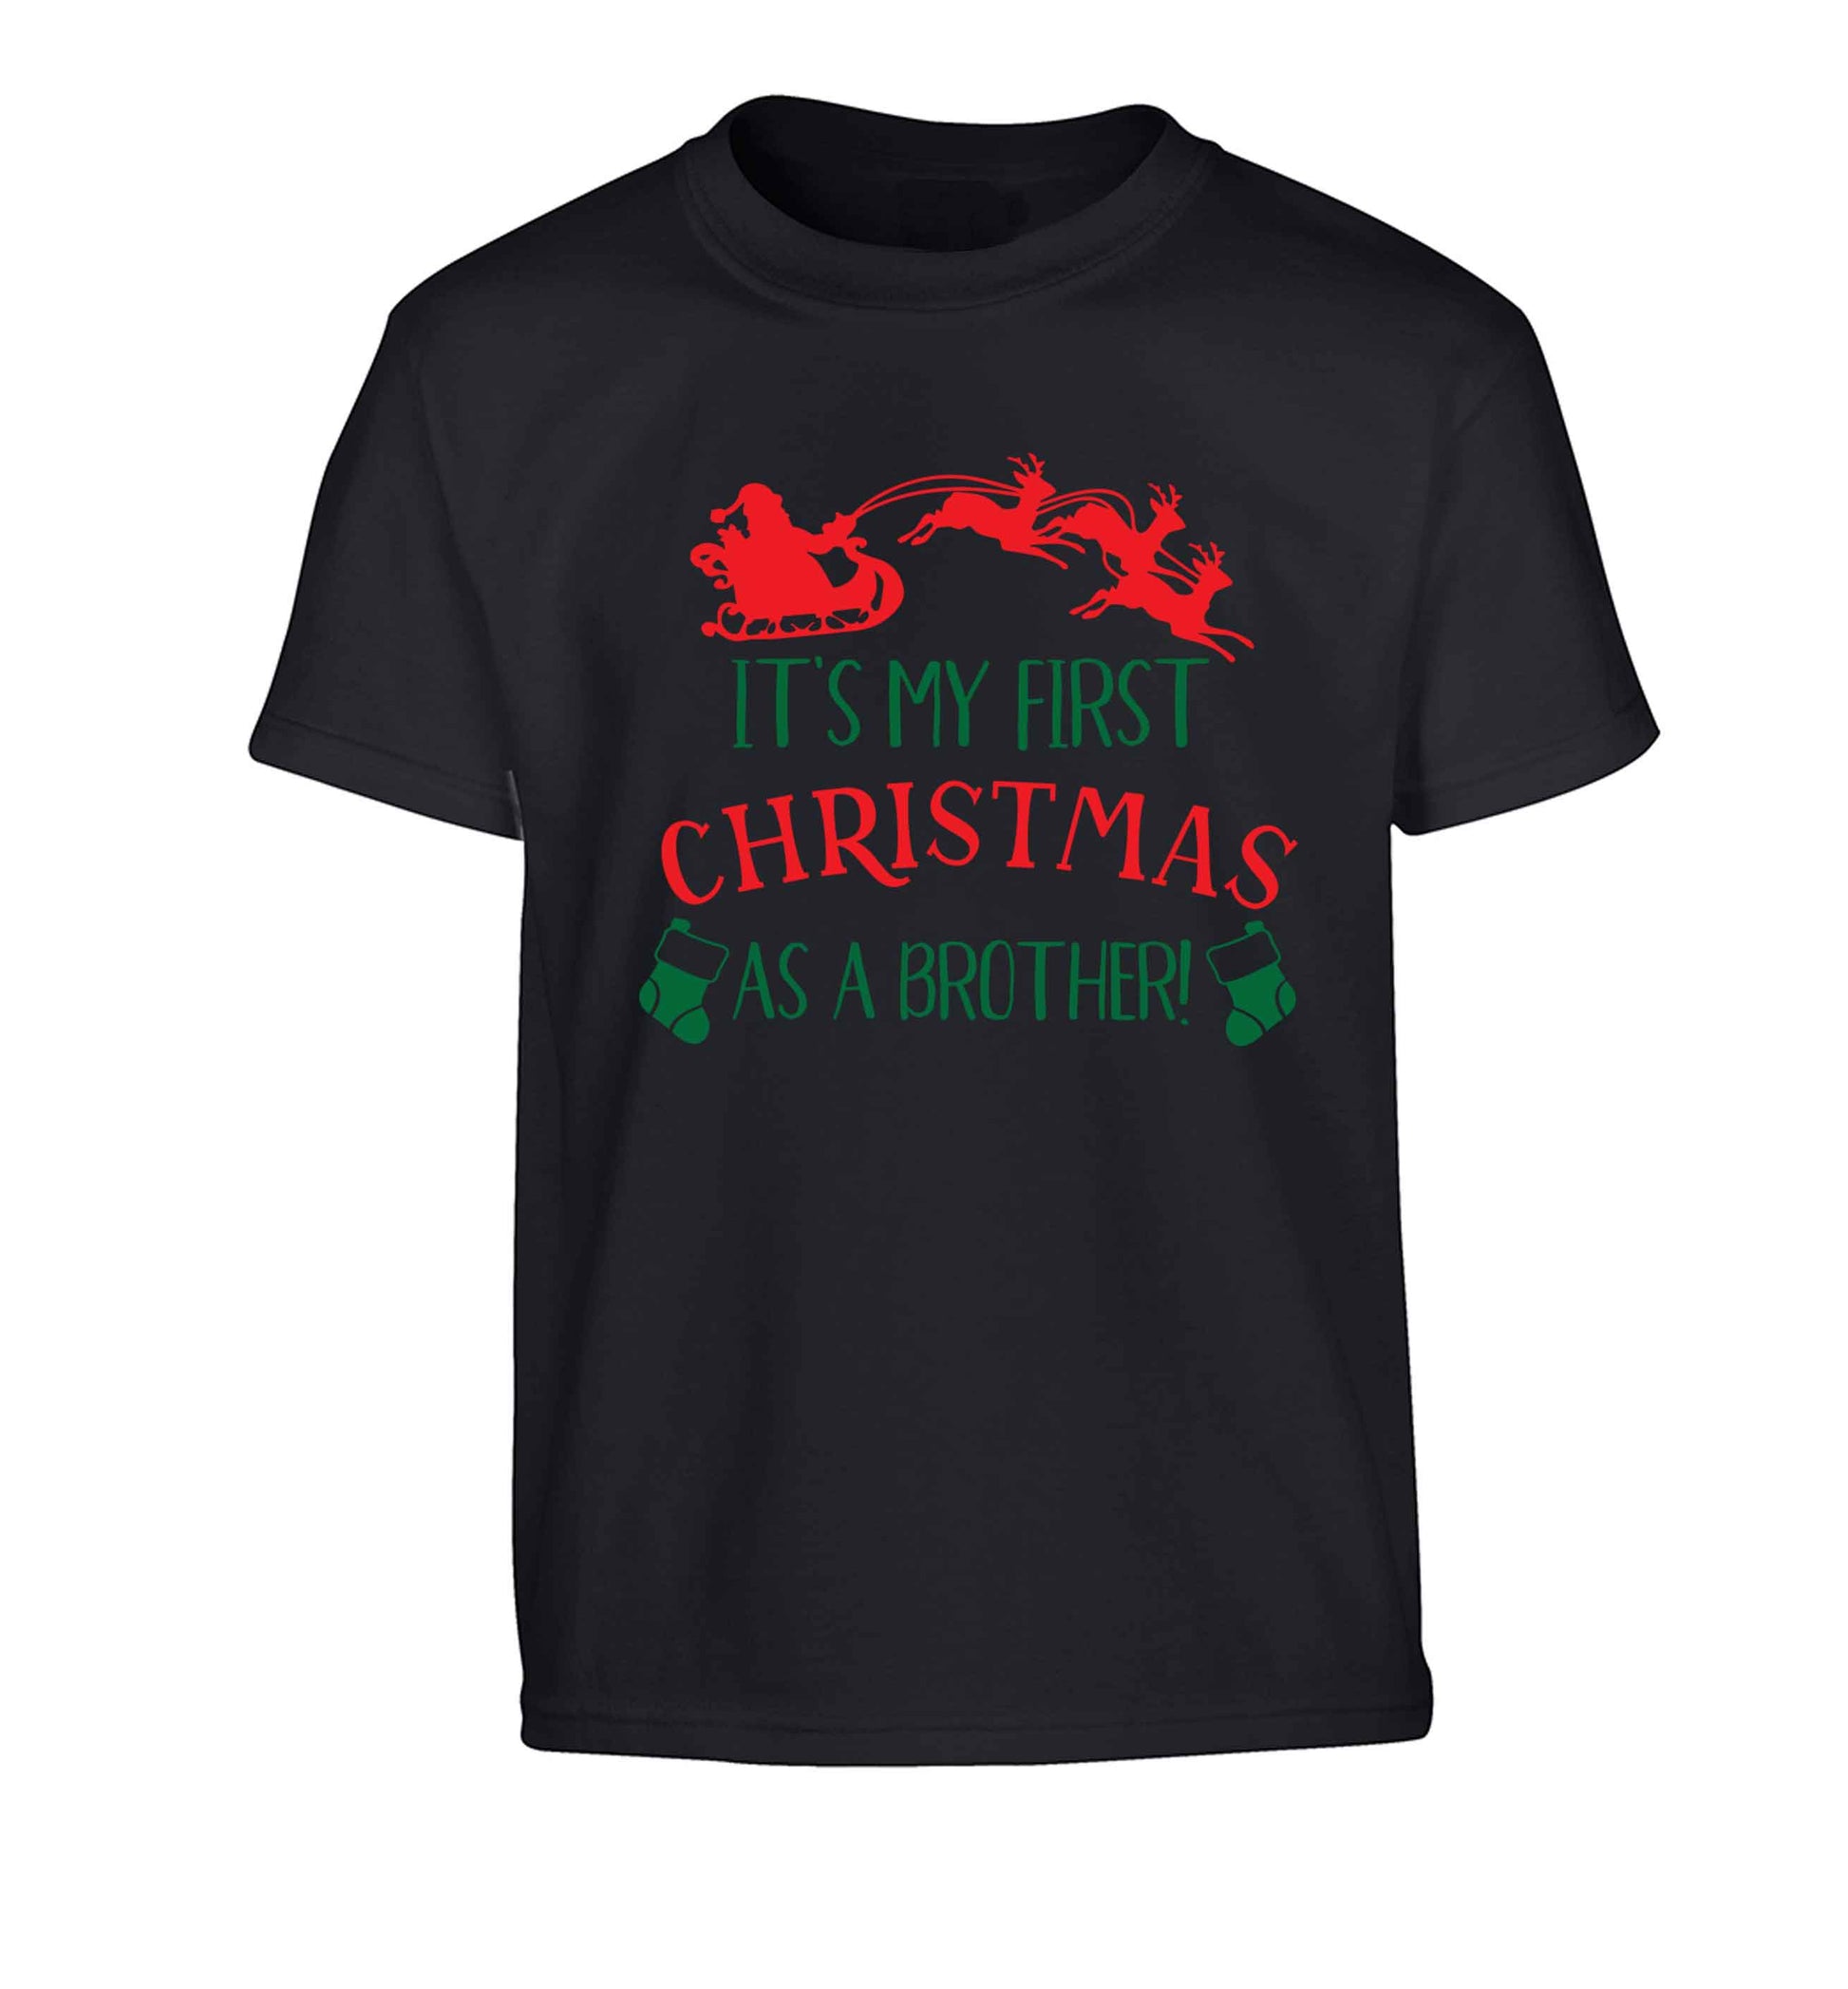 It's my first Christmas as a brother! Children's black Tshirt 12-13 Years